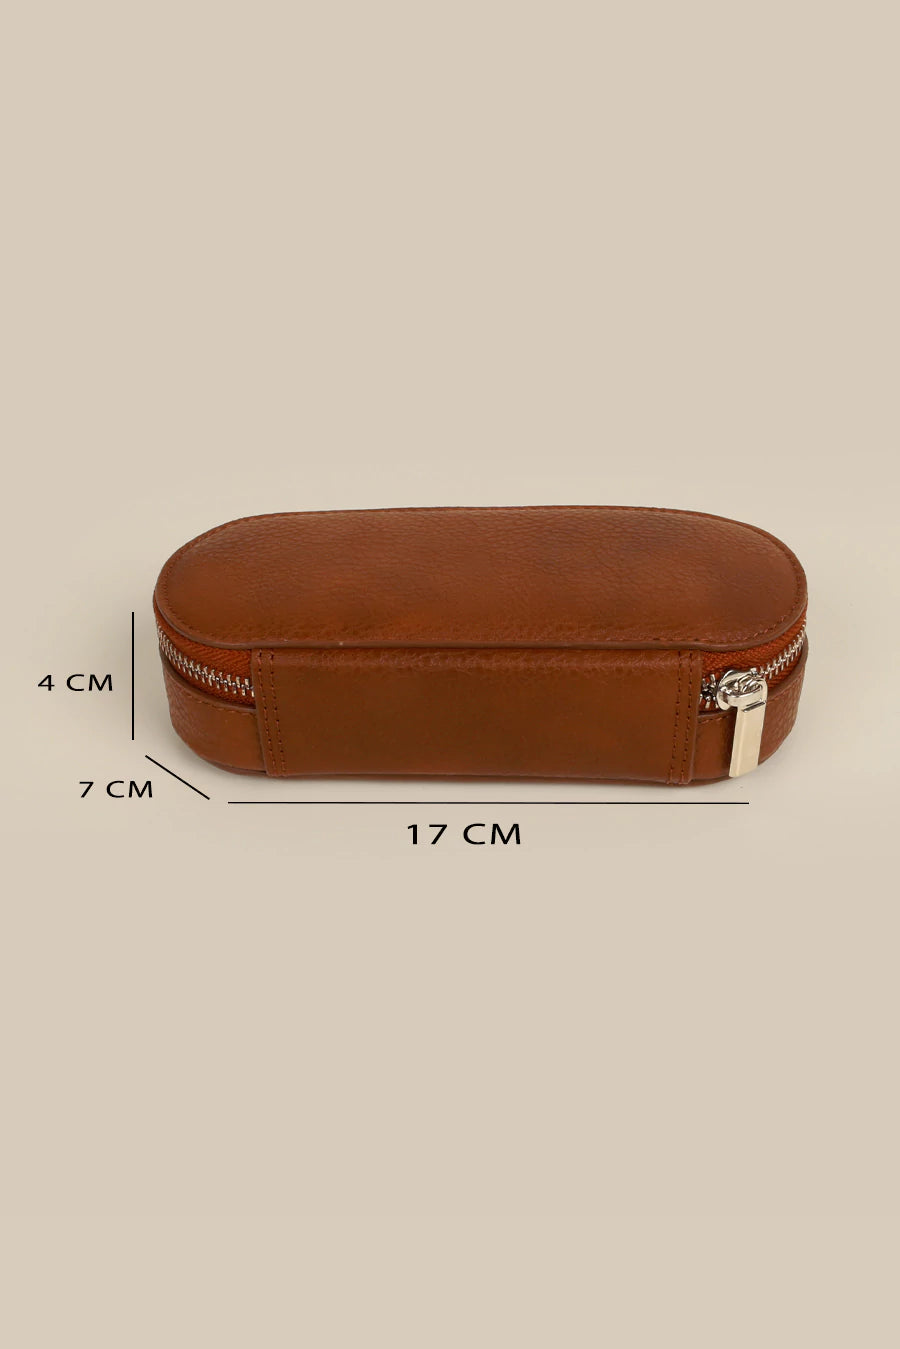 Vegan Leather Eyewear Case or Sunglass Cover Oxide Red Measurement